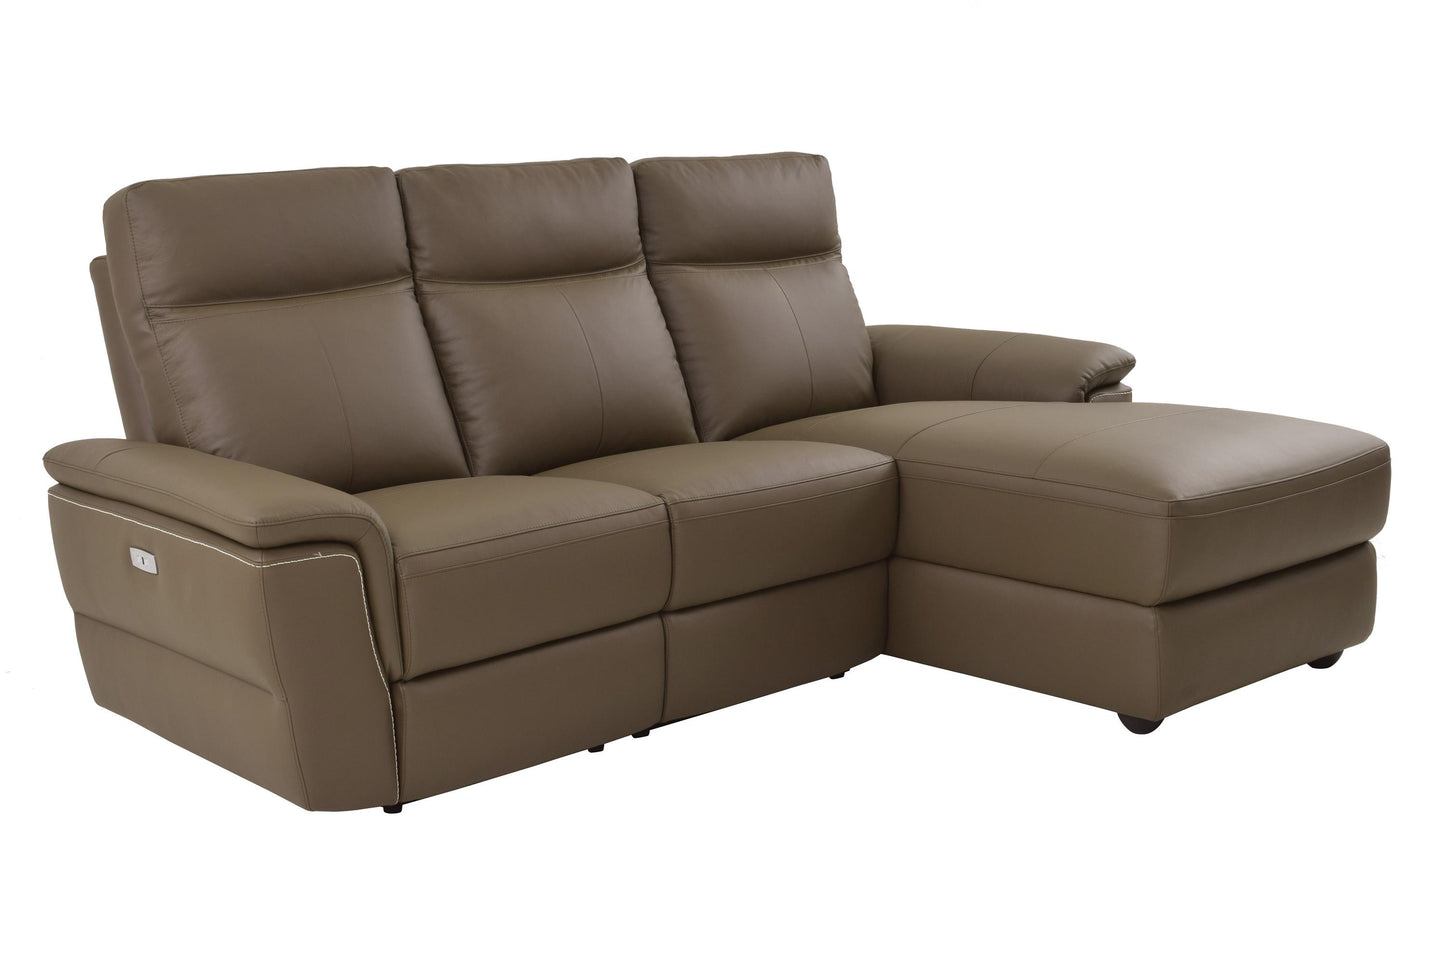 Homelegance Olympia 4PC Power Sectional Left Chaise, Console, Recliner Chair & Right Recliner Chair - Top Grain Leather Brown Taupe